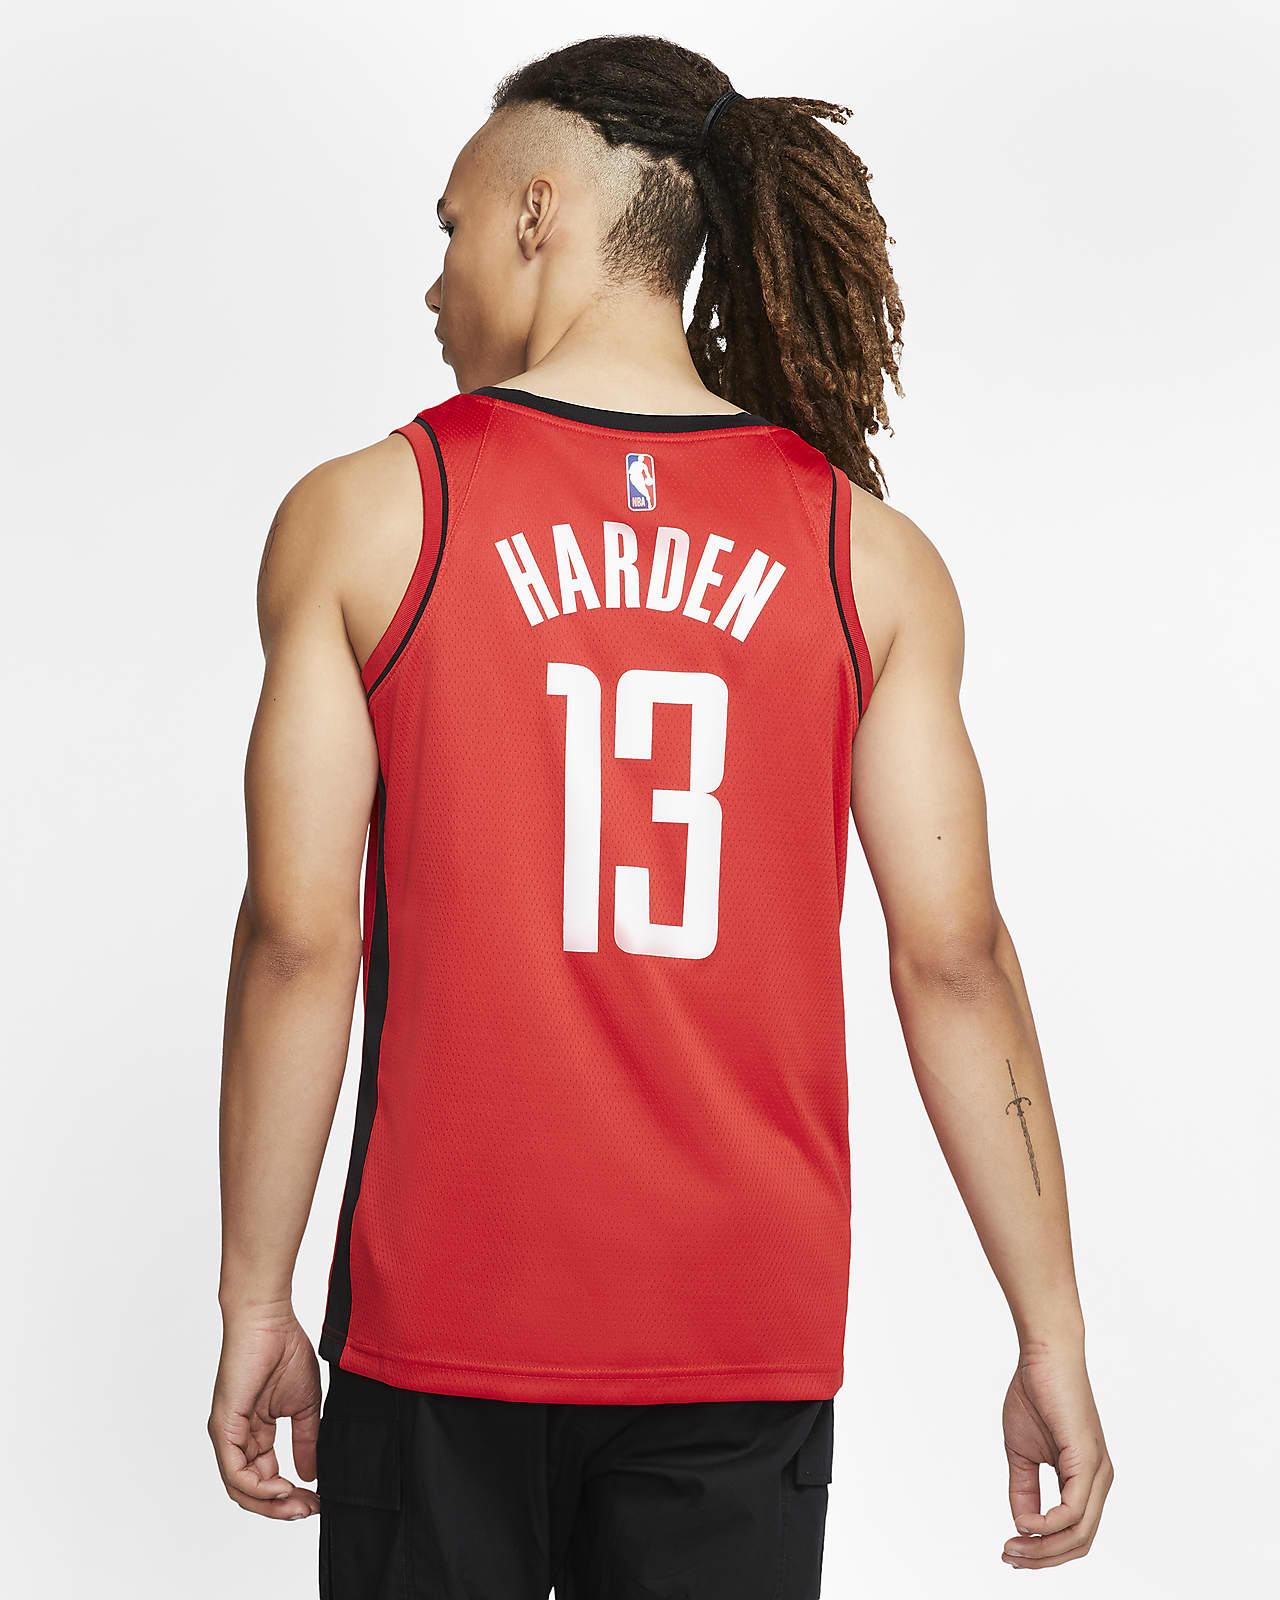 harden jersey,Save up to 19%,www.ilcascinone.com